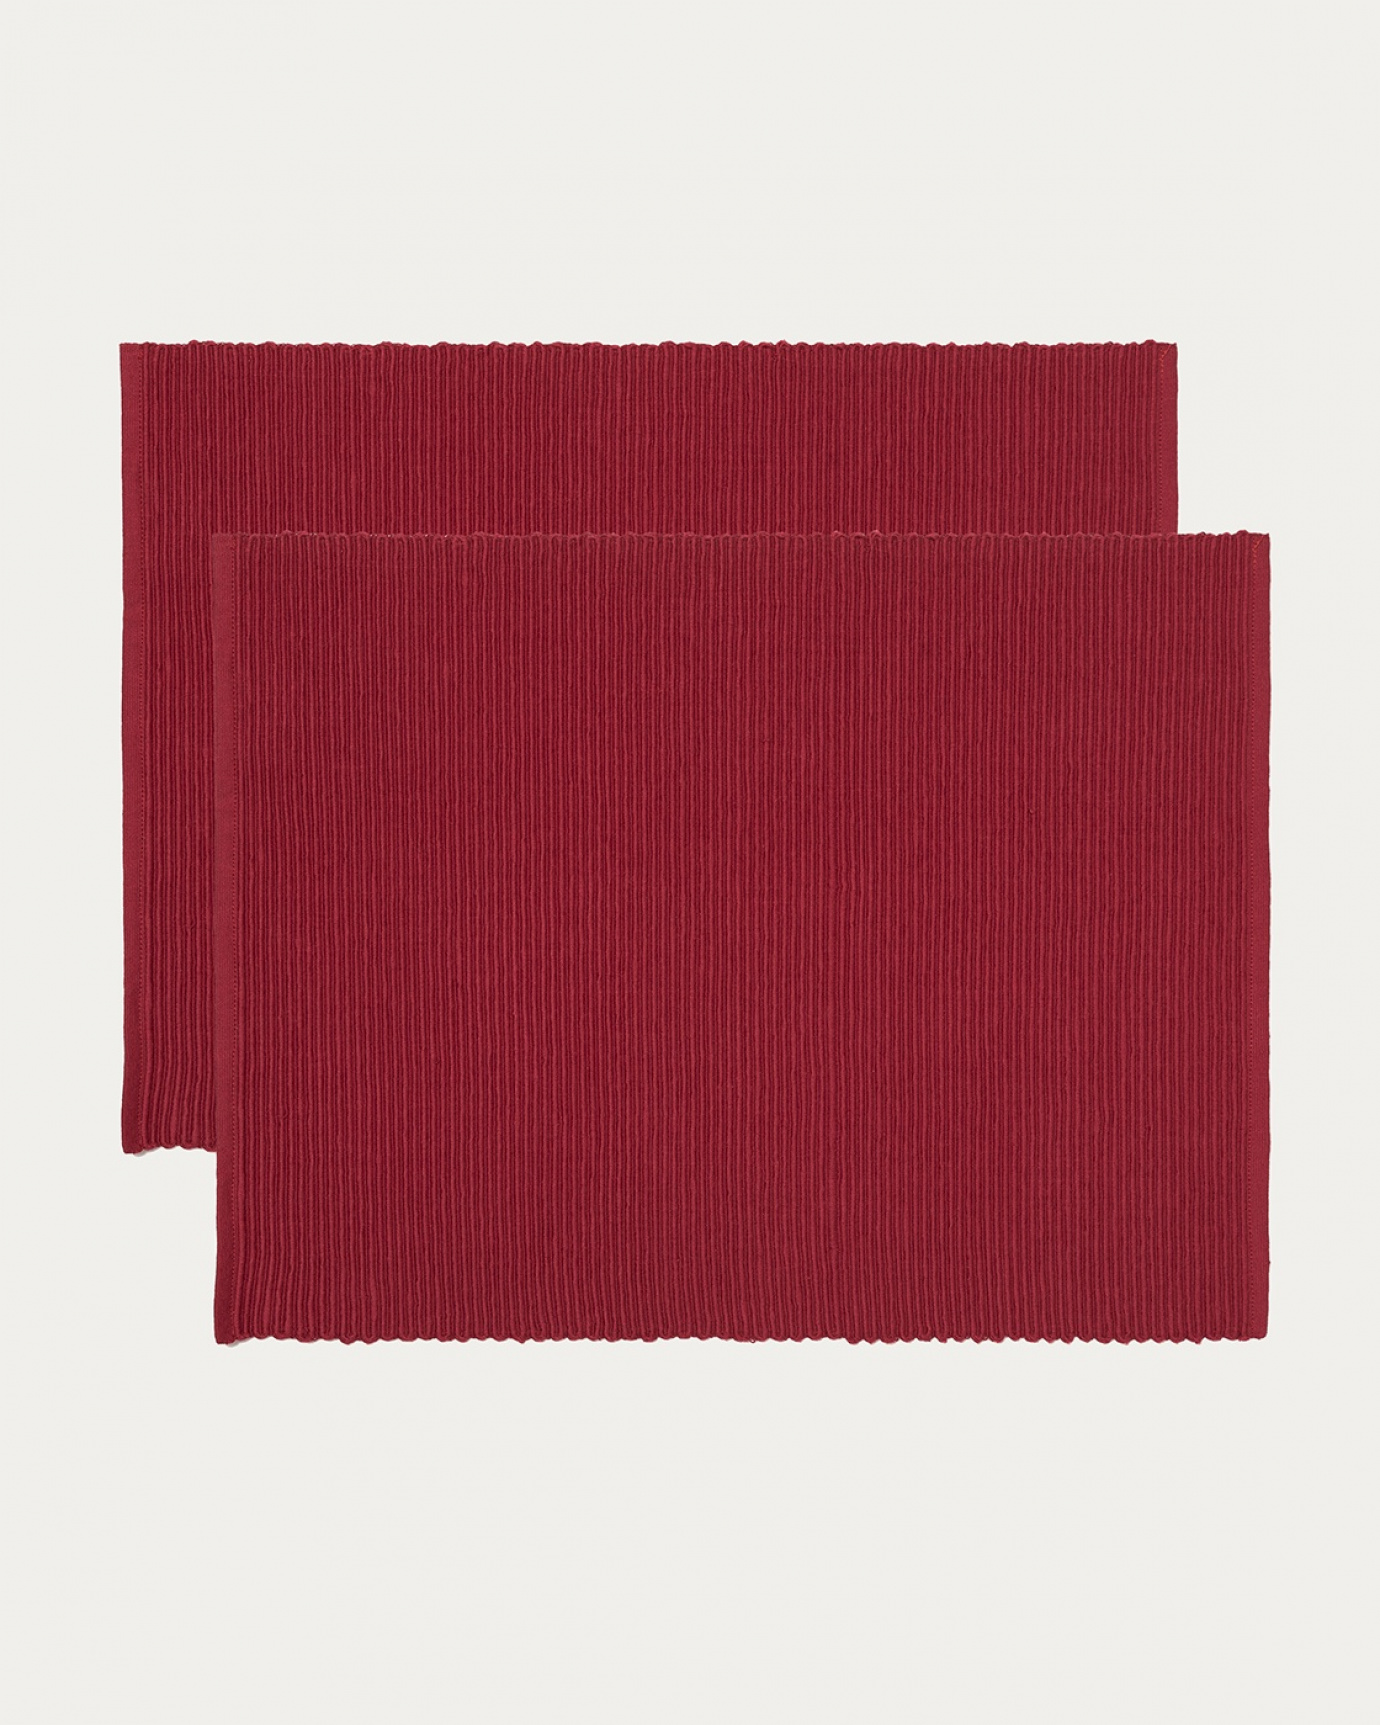 Product image red UNI placemat made of soft cotton in ribbed quality from LINUM DESIGN. Size 35x46 cm and sold in 2-pack.